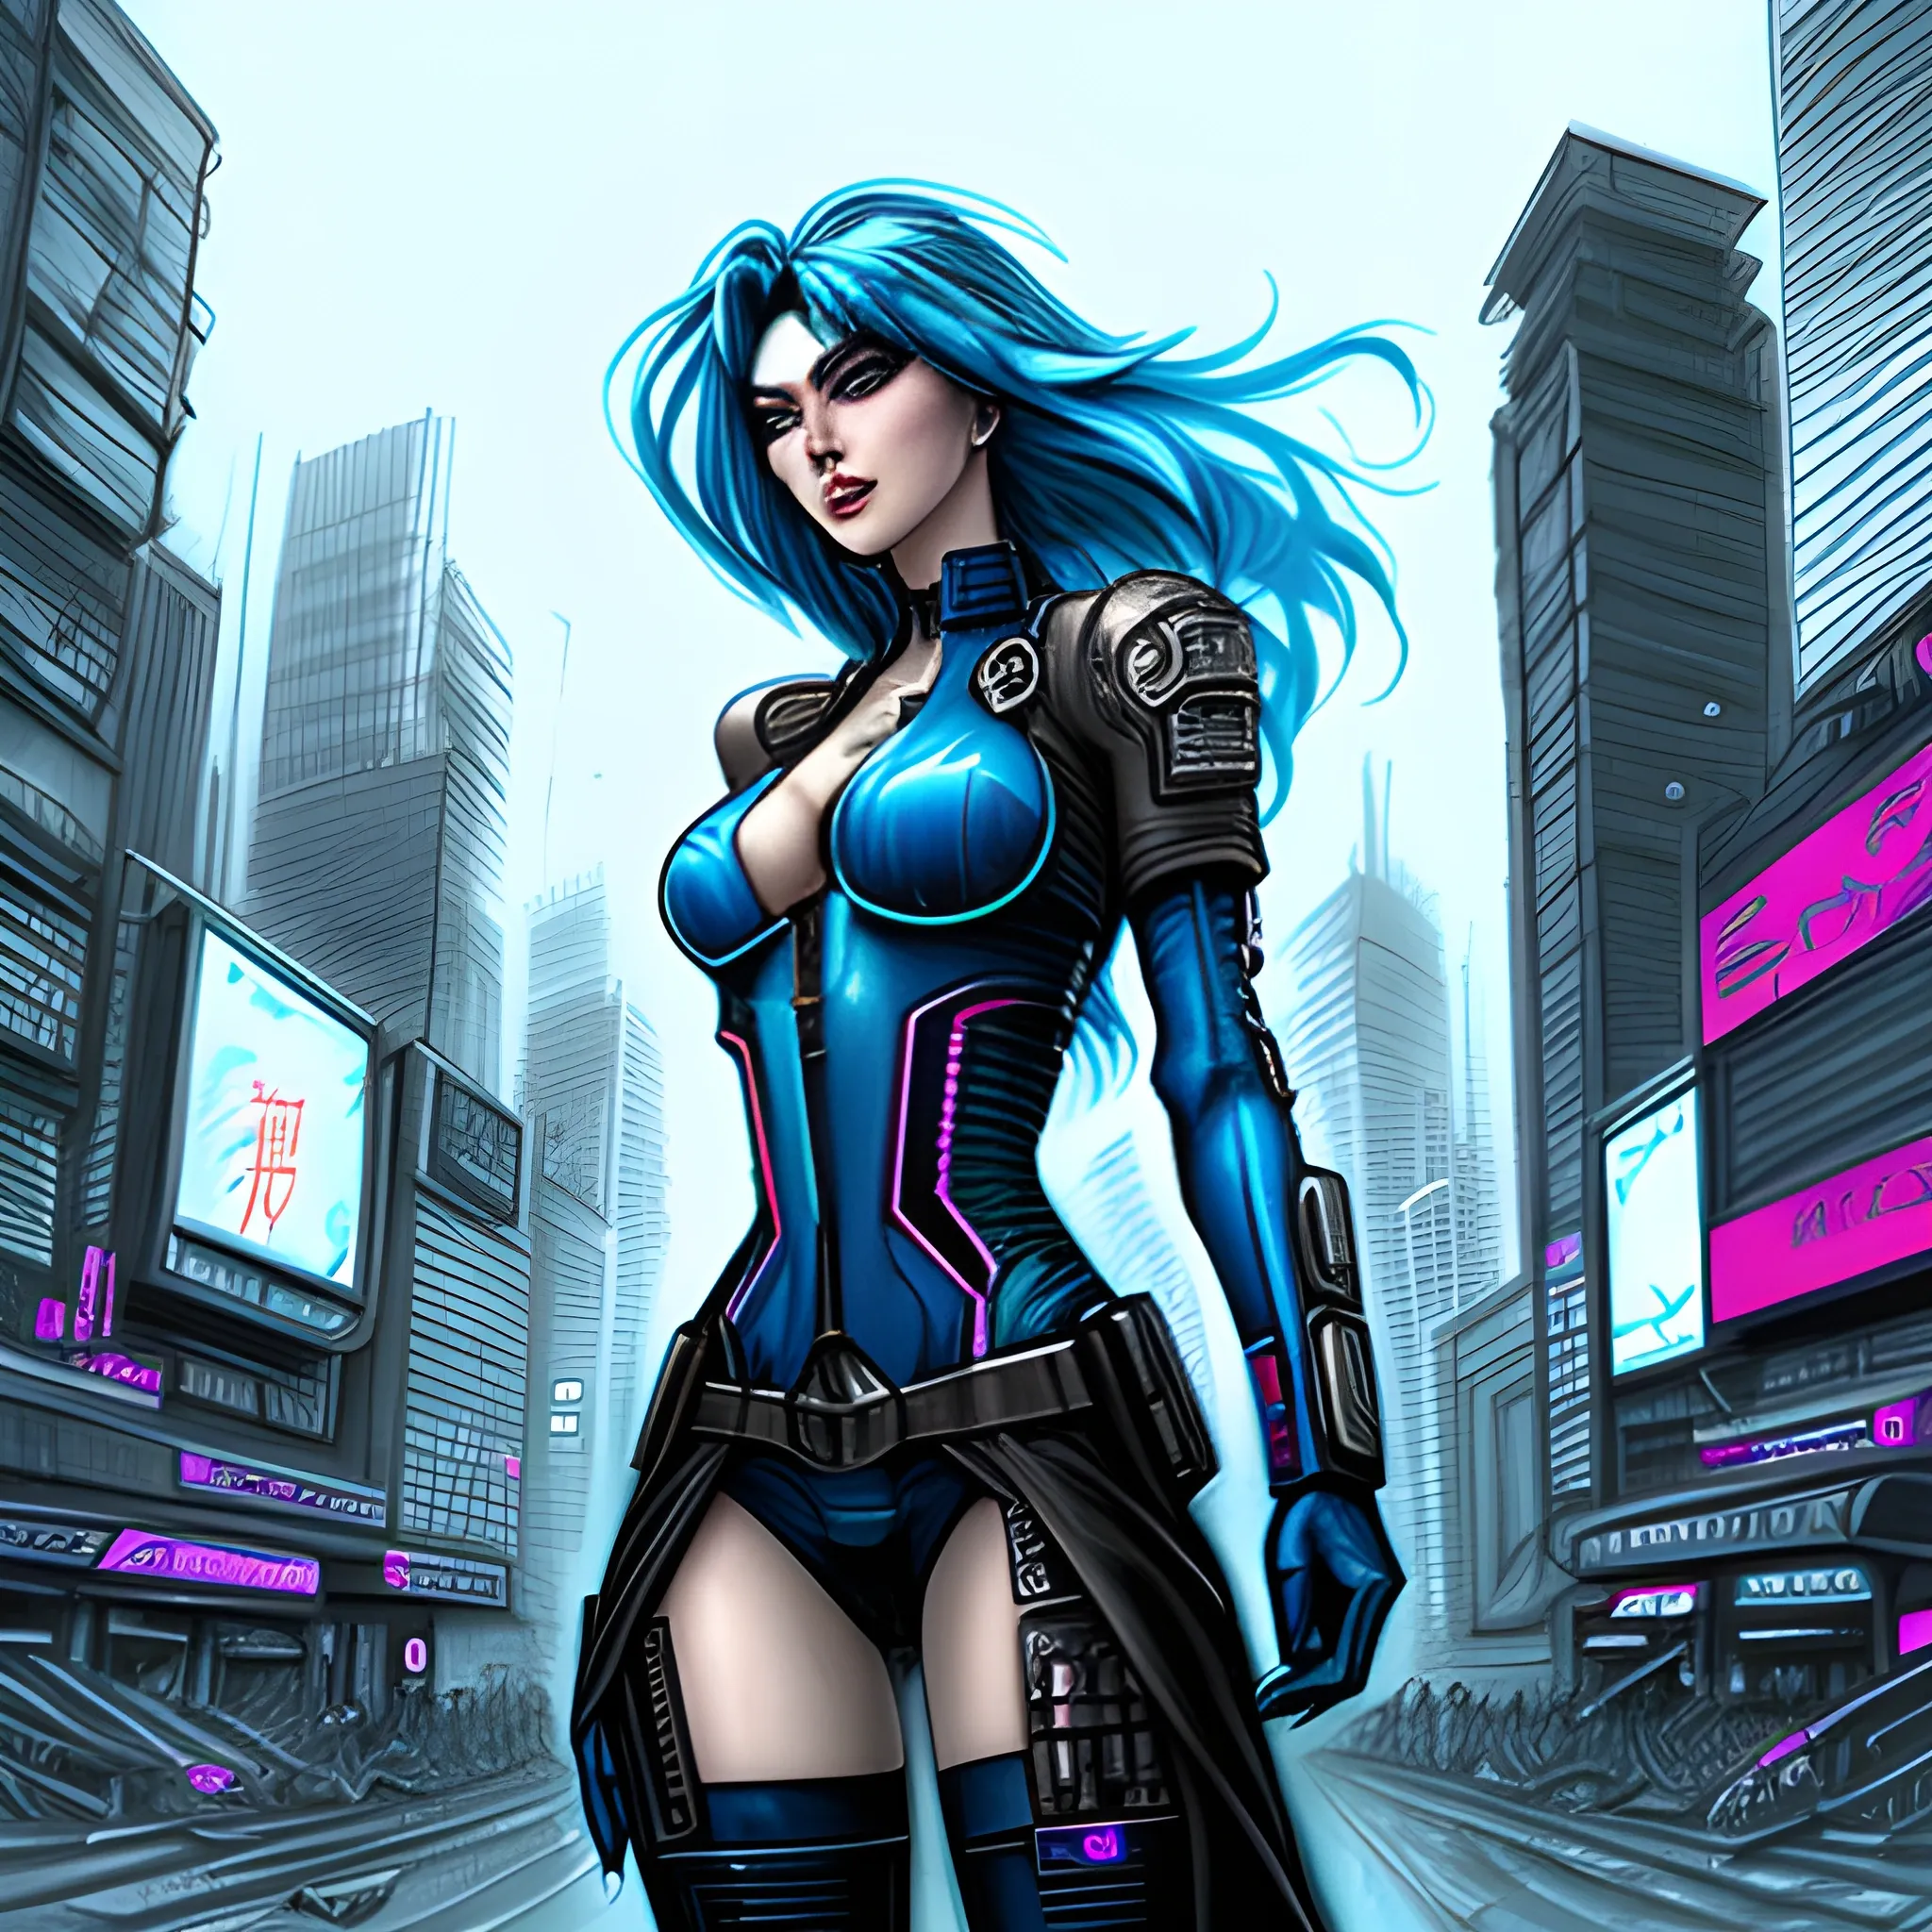 girl whit large blue hair, stands in a city, cyberpunk art by Kim Hong-do,Pencil Sketch